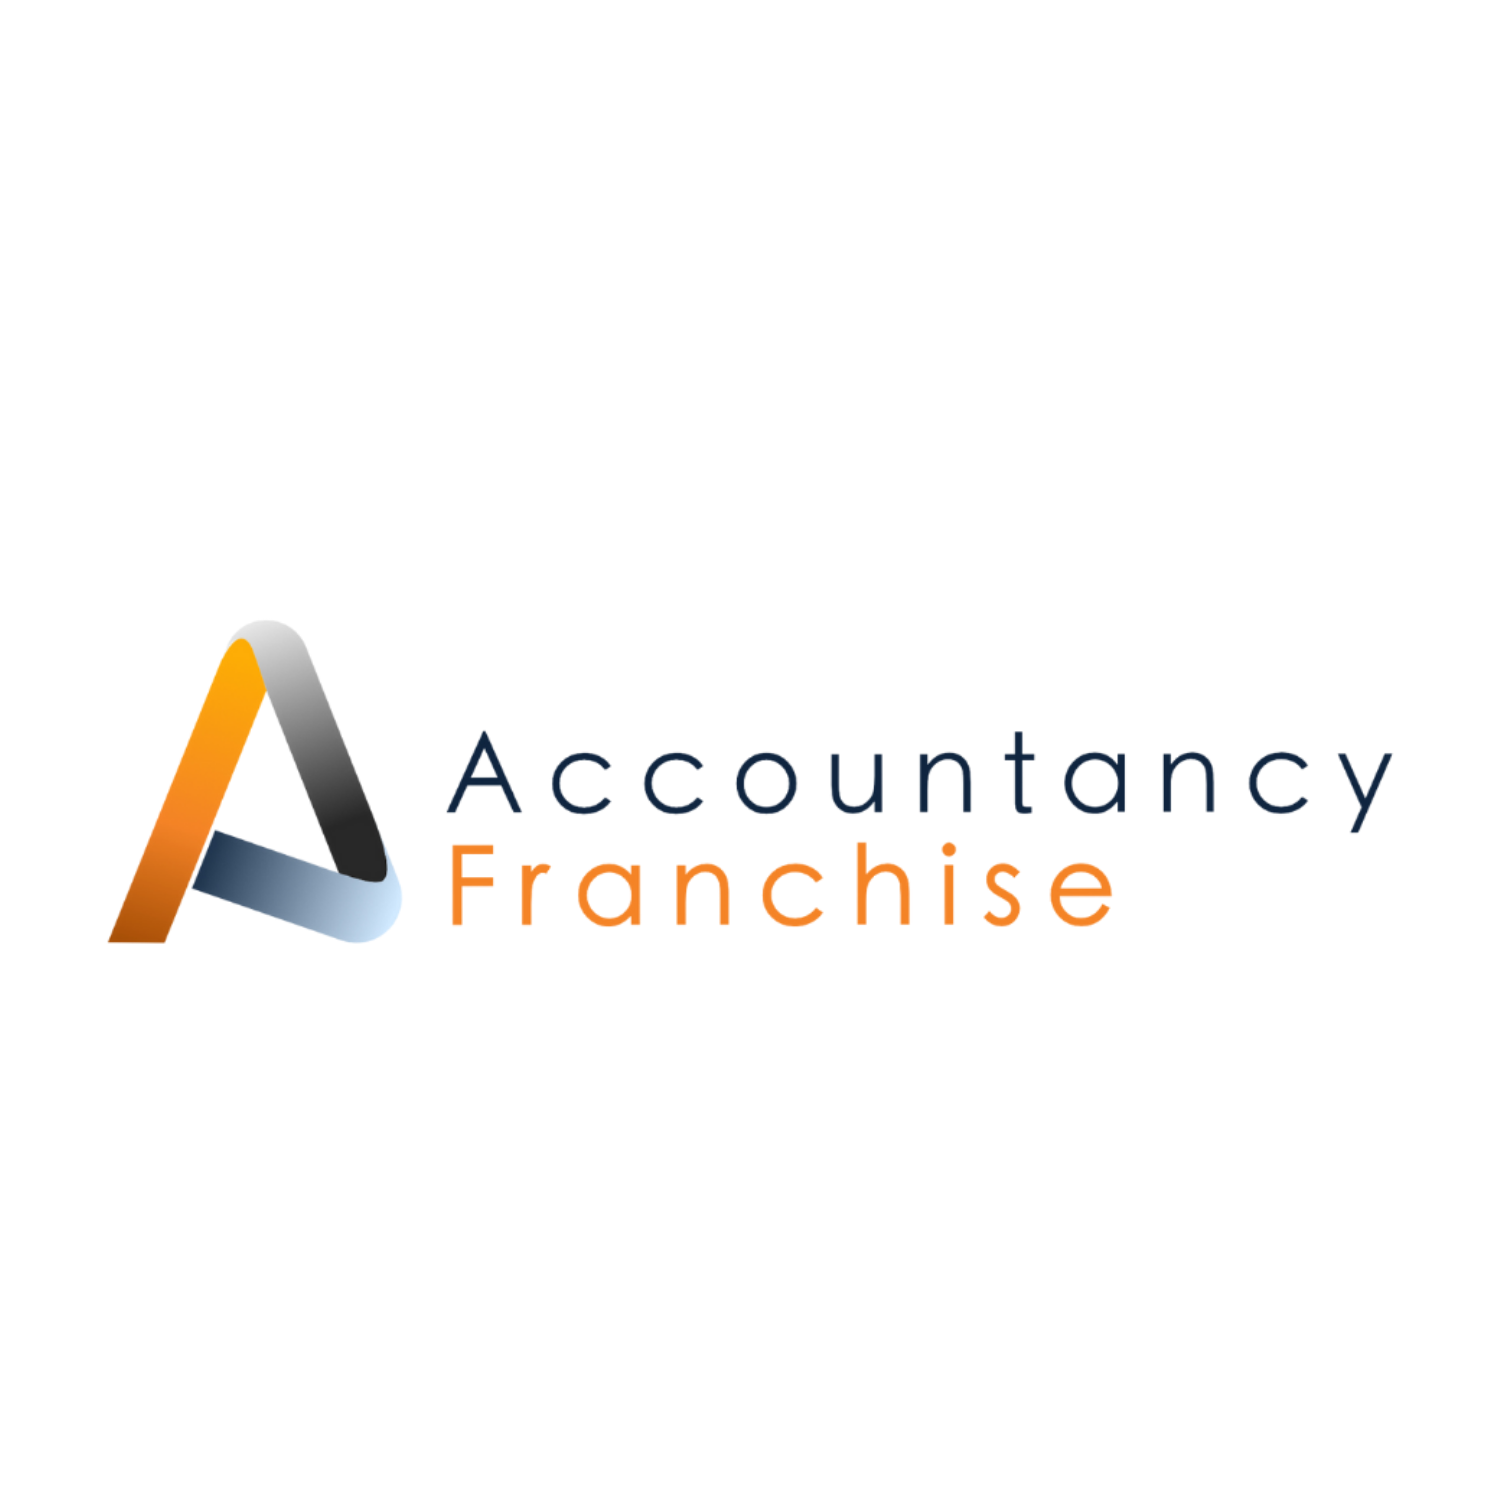 The Accountancy Franchise